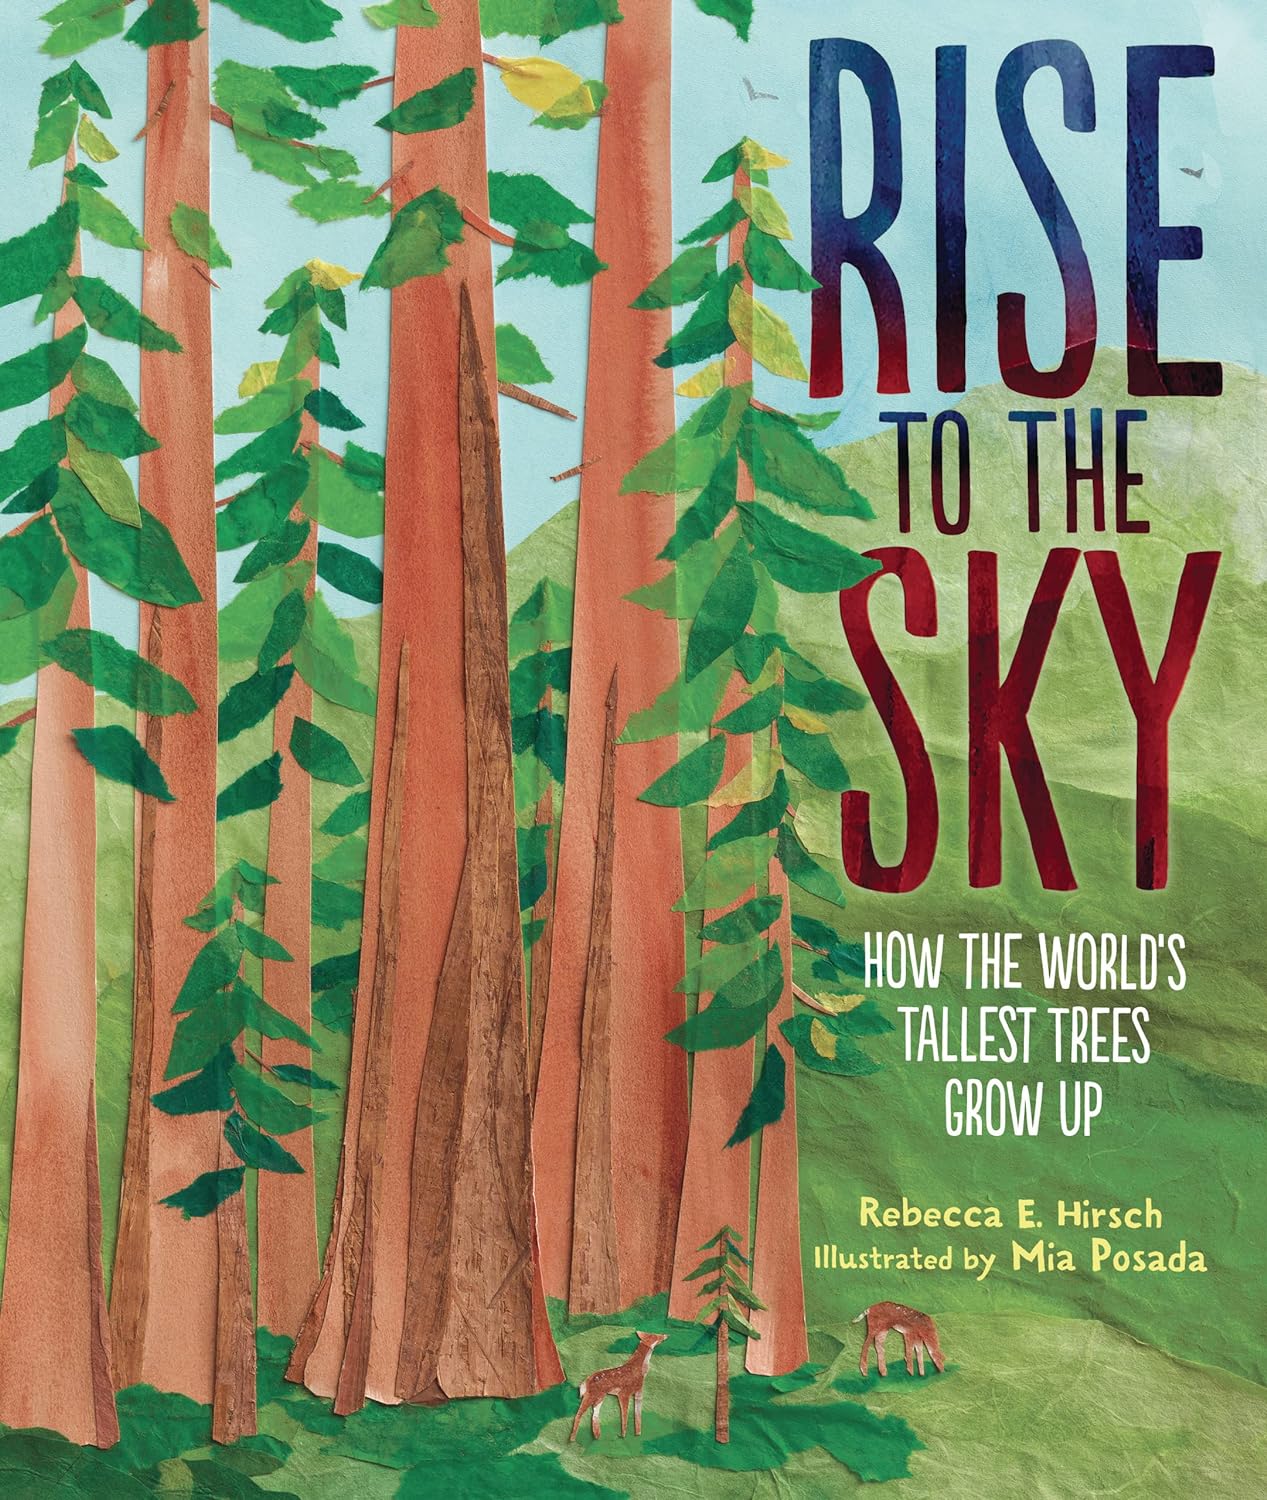 "Rise To The Sky: How the world's tallest trees grow up" book cover, pictures of trees